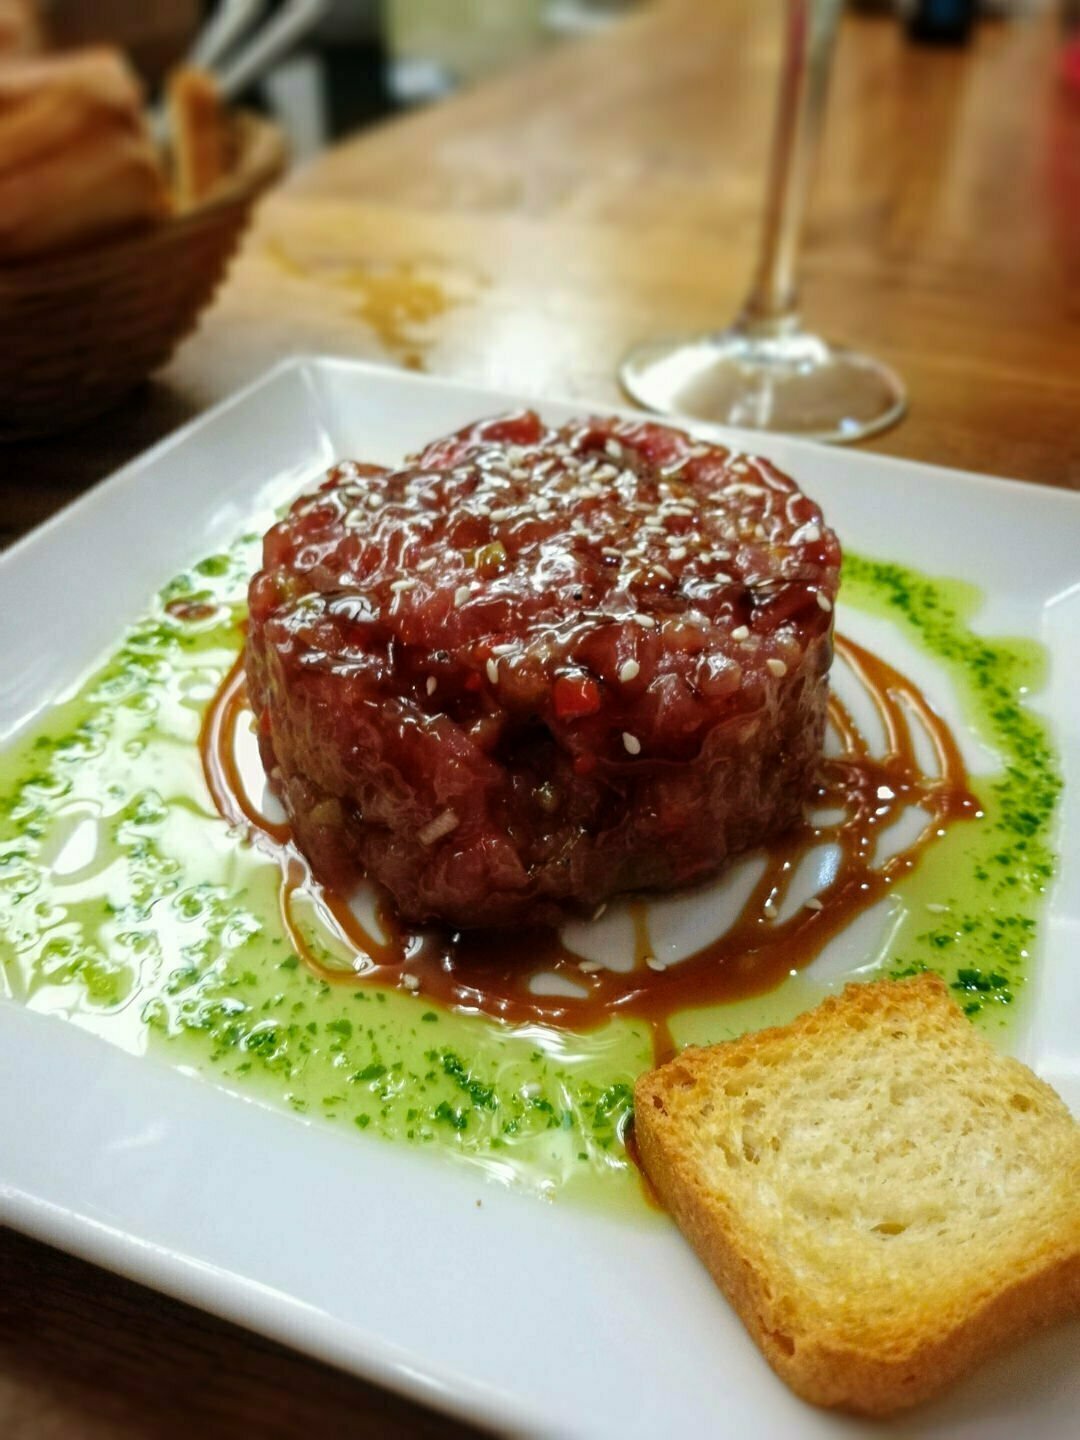 A plate of tuna tartare sits with some green parsley and oil garnish